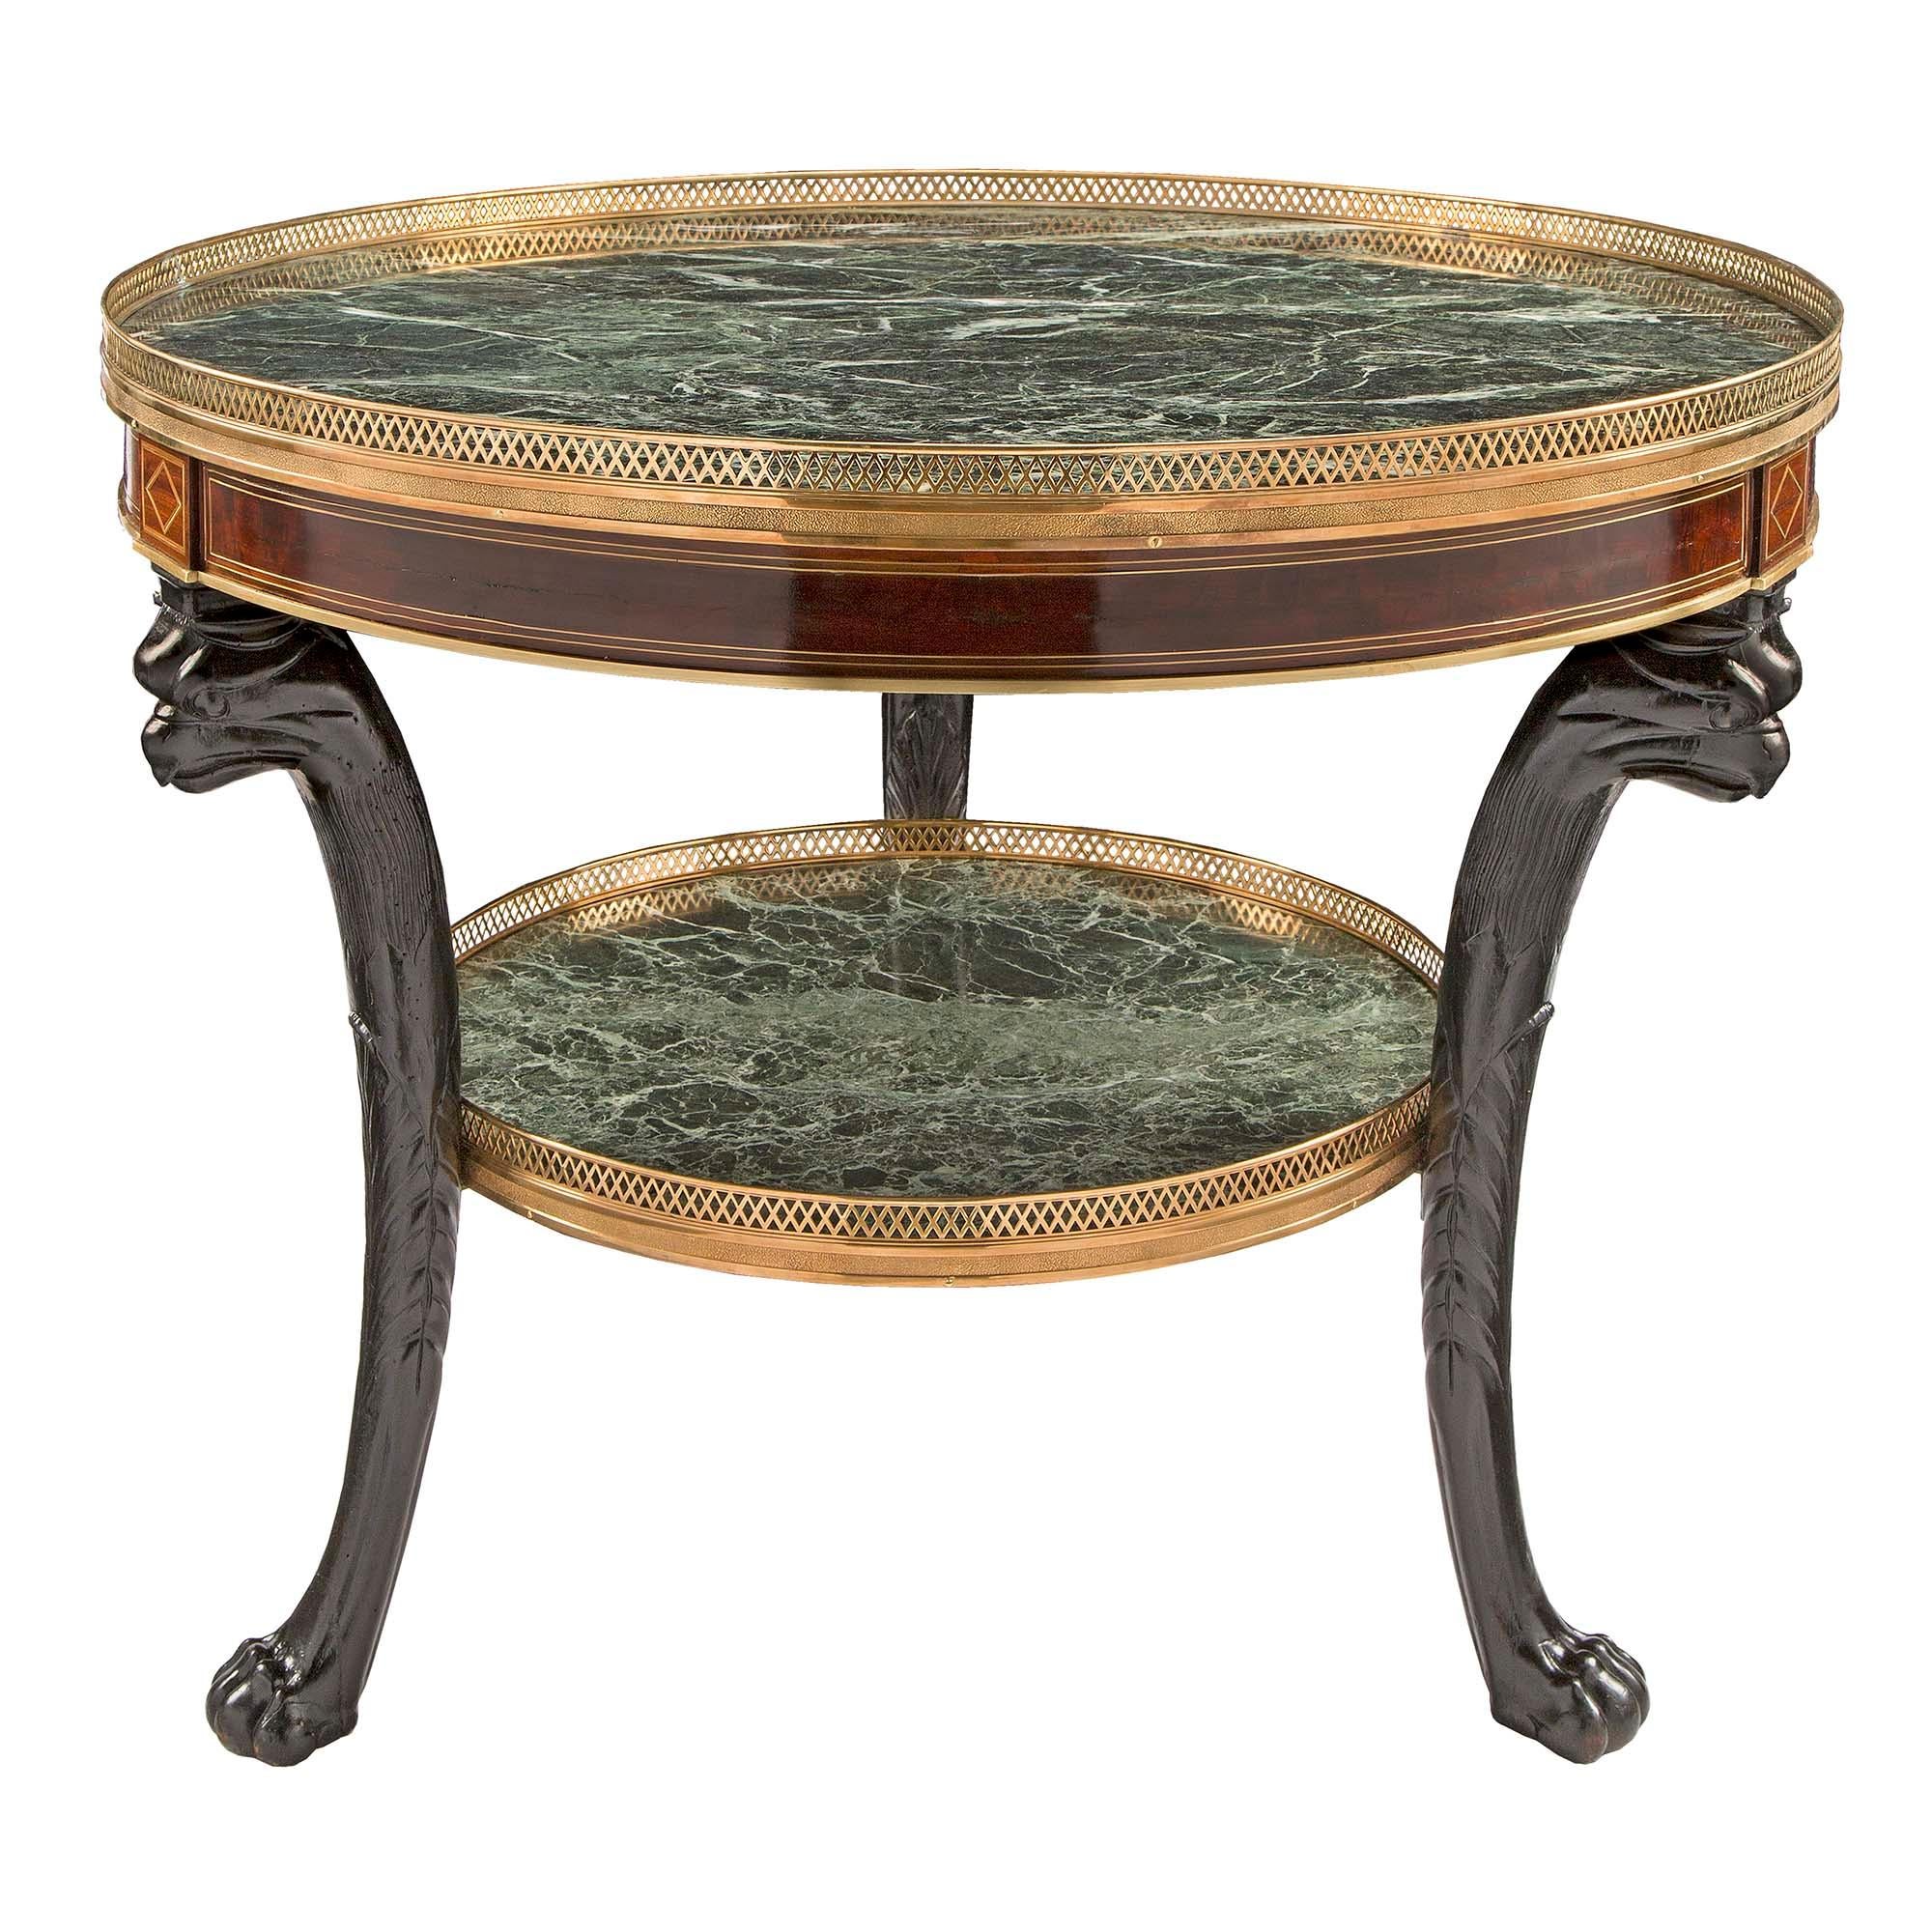 Neoclassical French 19th Century Neo-Classical St. Mahogany, Marble, And Ormolu Center Table For Sale